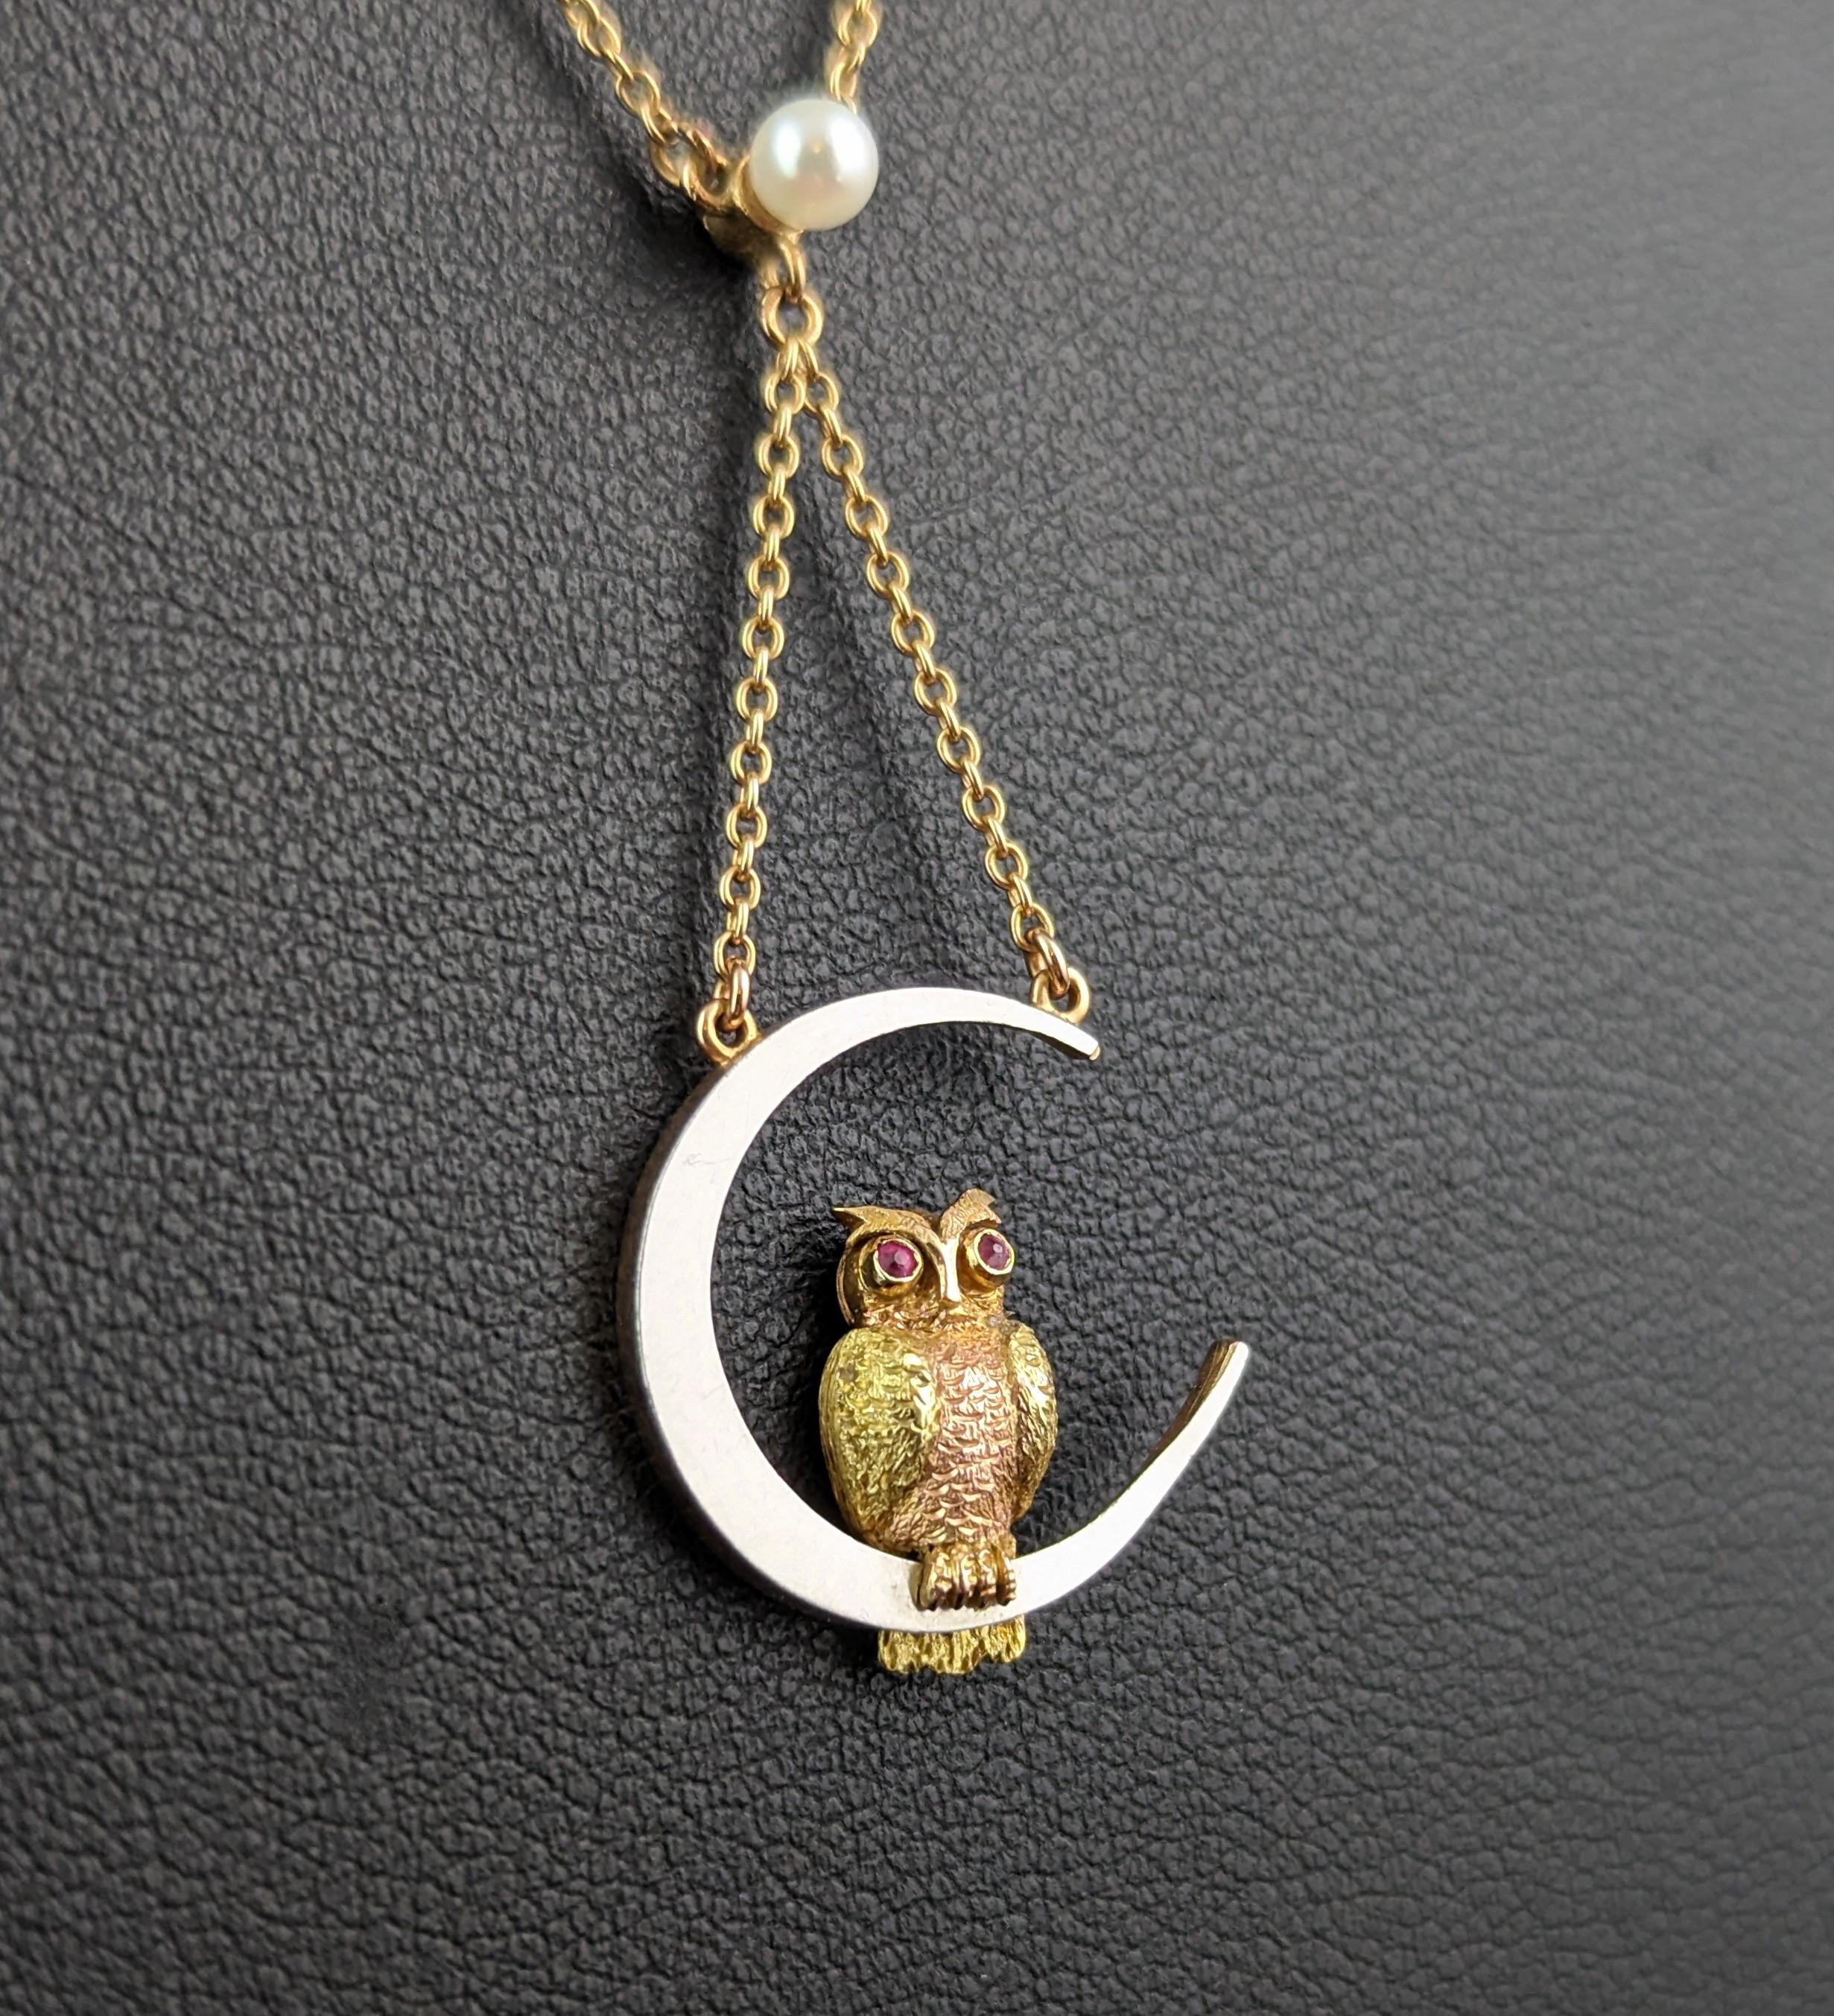 Antique Owl and Crescent moon pendant necklace, 15k gold and platinum, Ruby For Sale 9